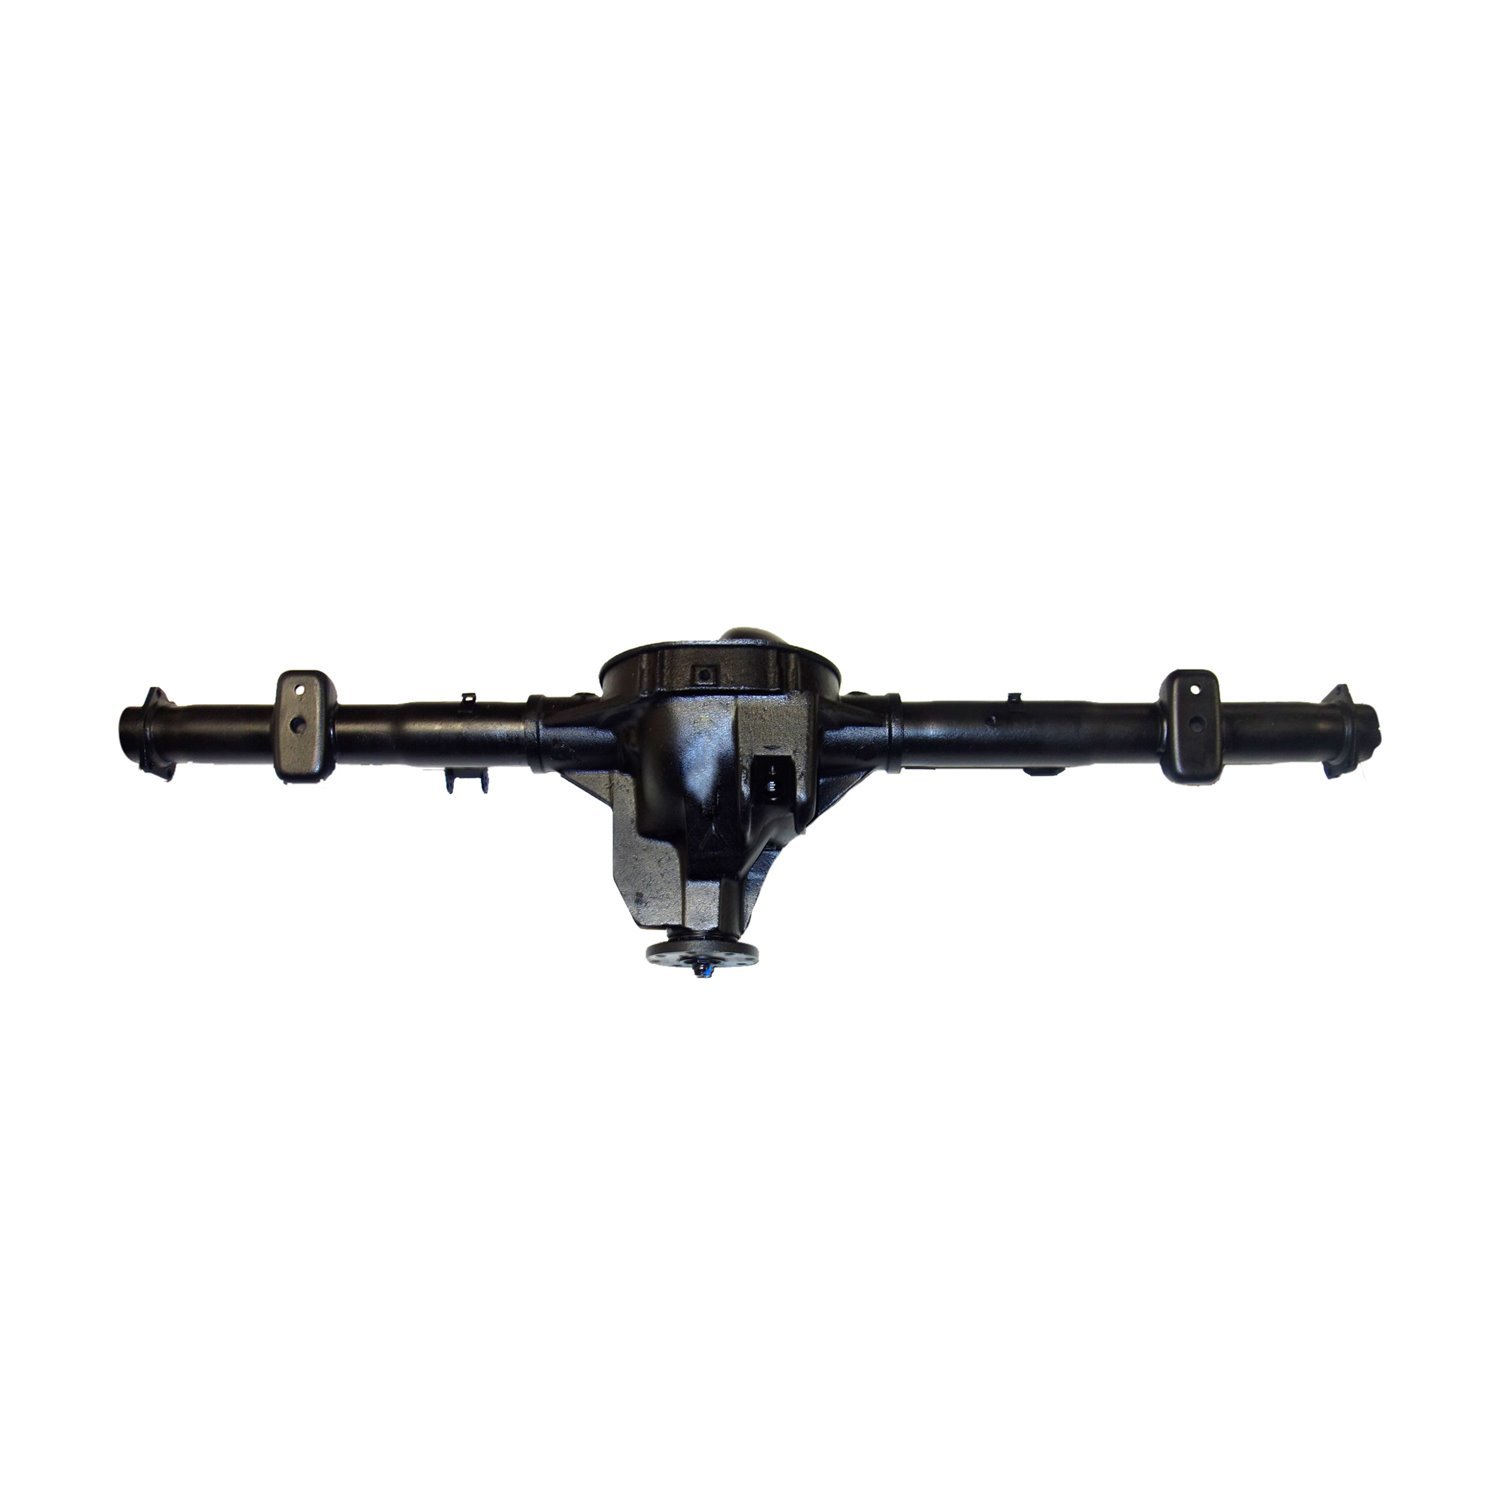 Remanufactured Complete Axle Assembly for 8.8" 99-05 Ranger 4.11 , 10" Drum Brakes